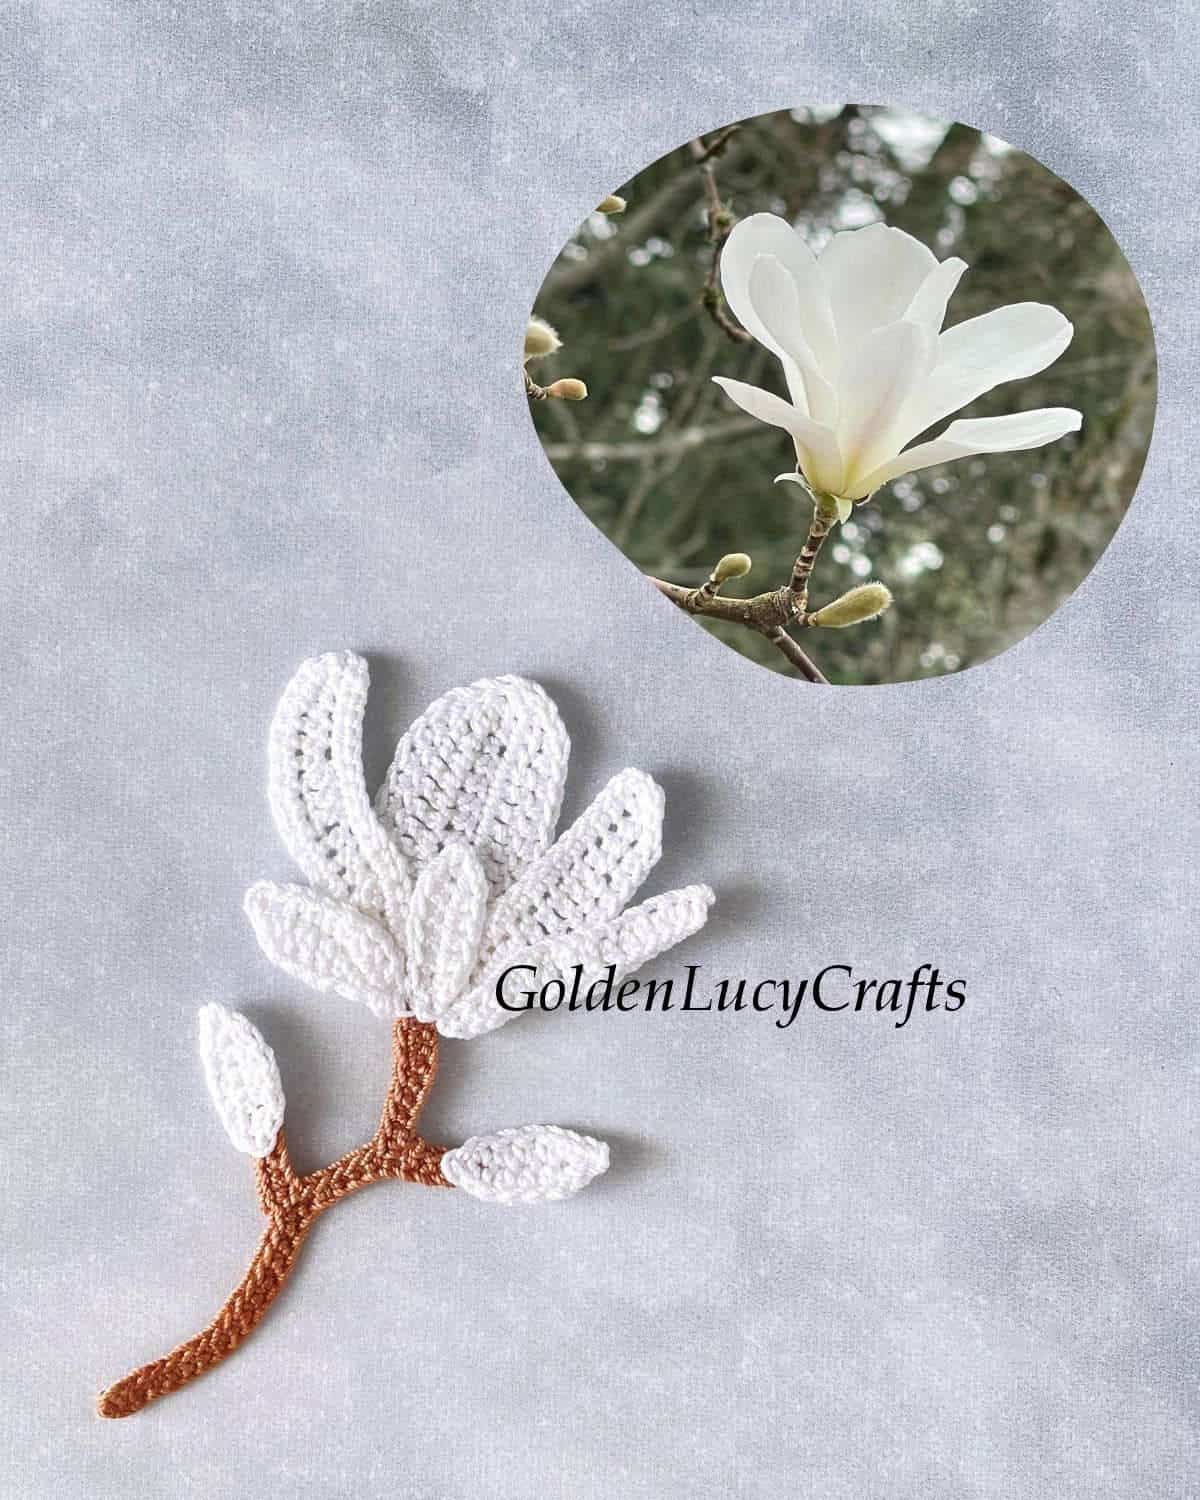 Crocheted and real white magnolia flowers.